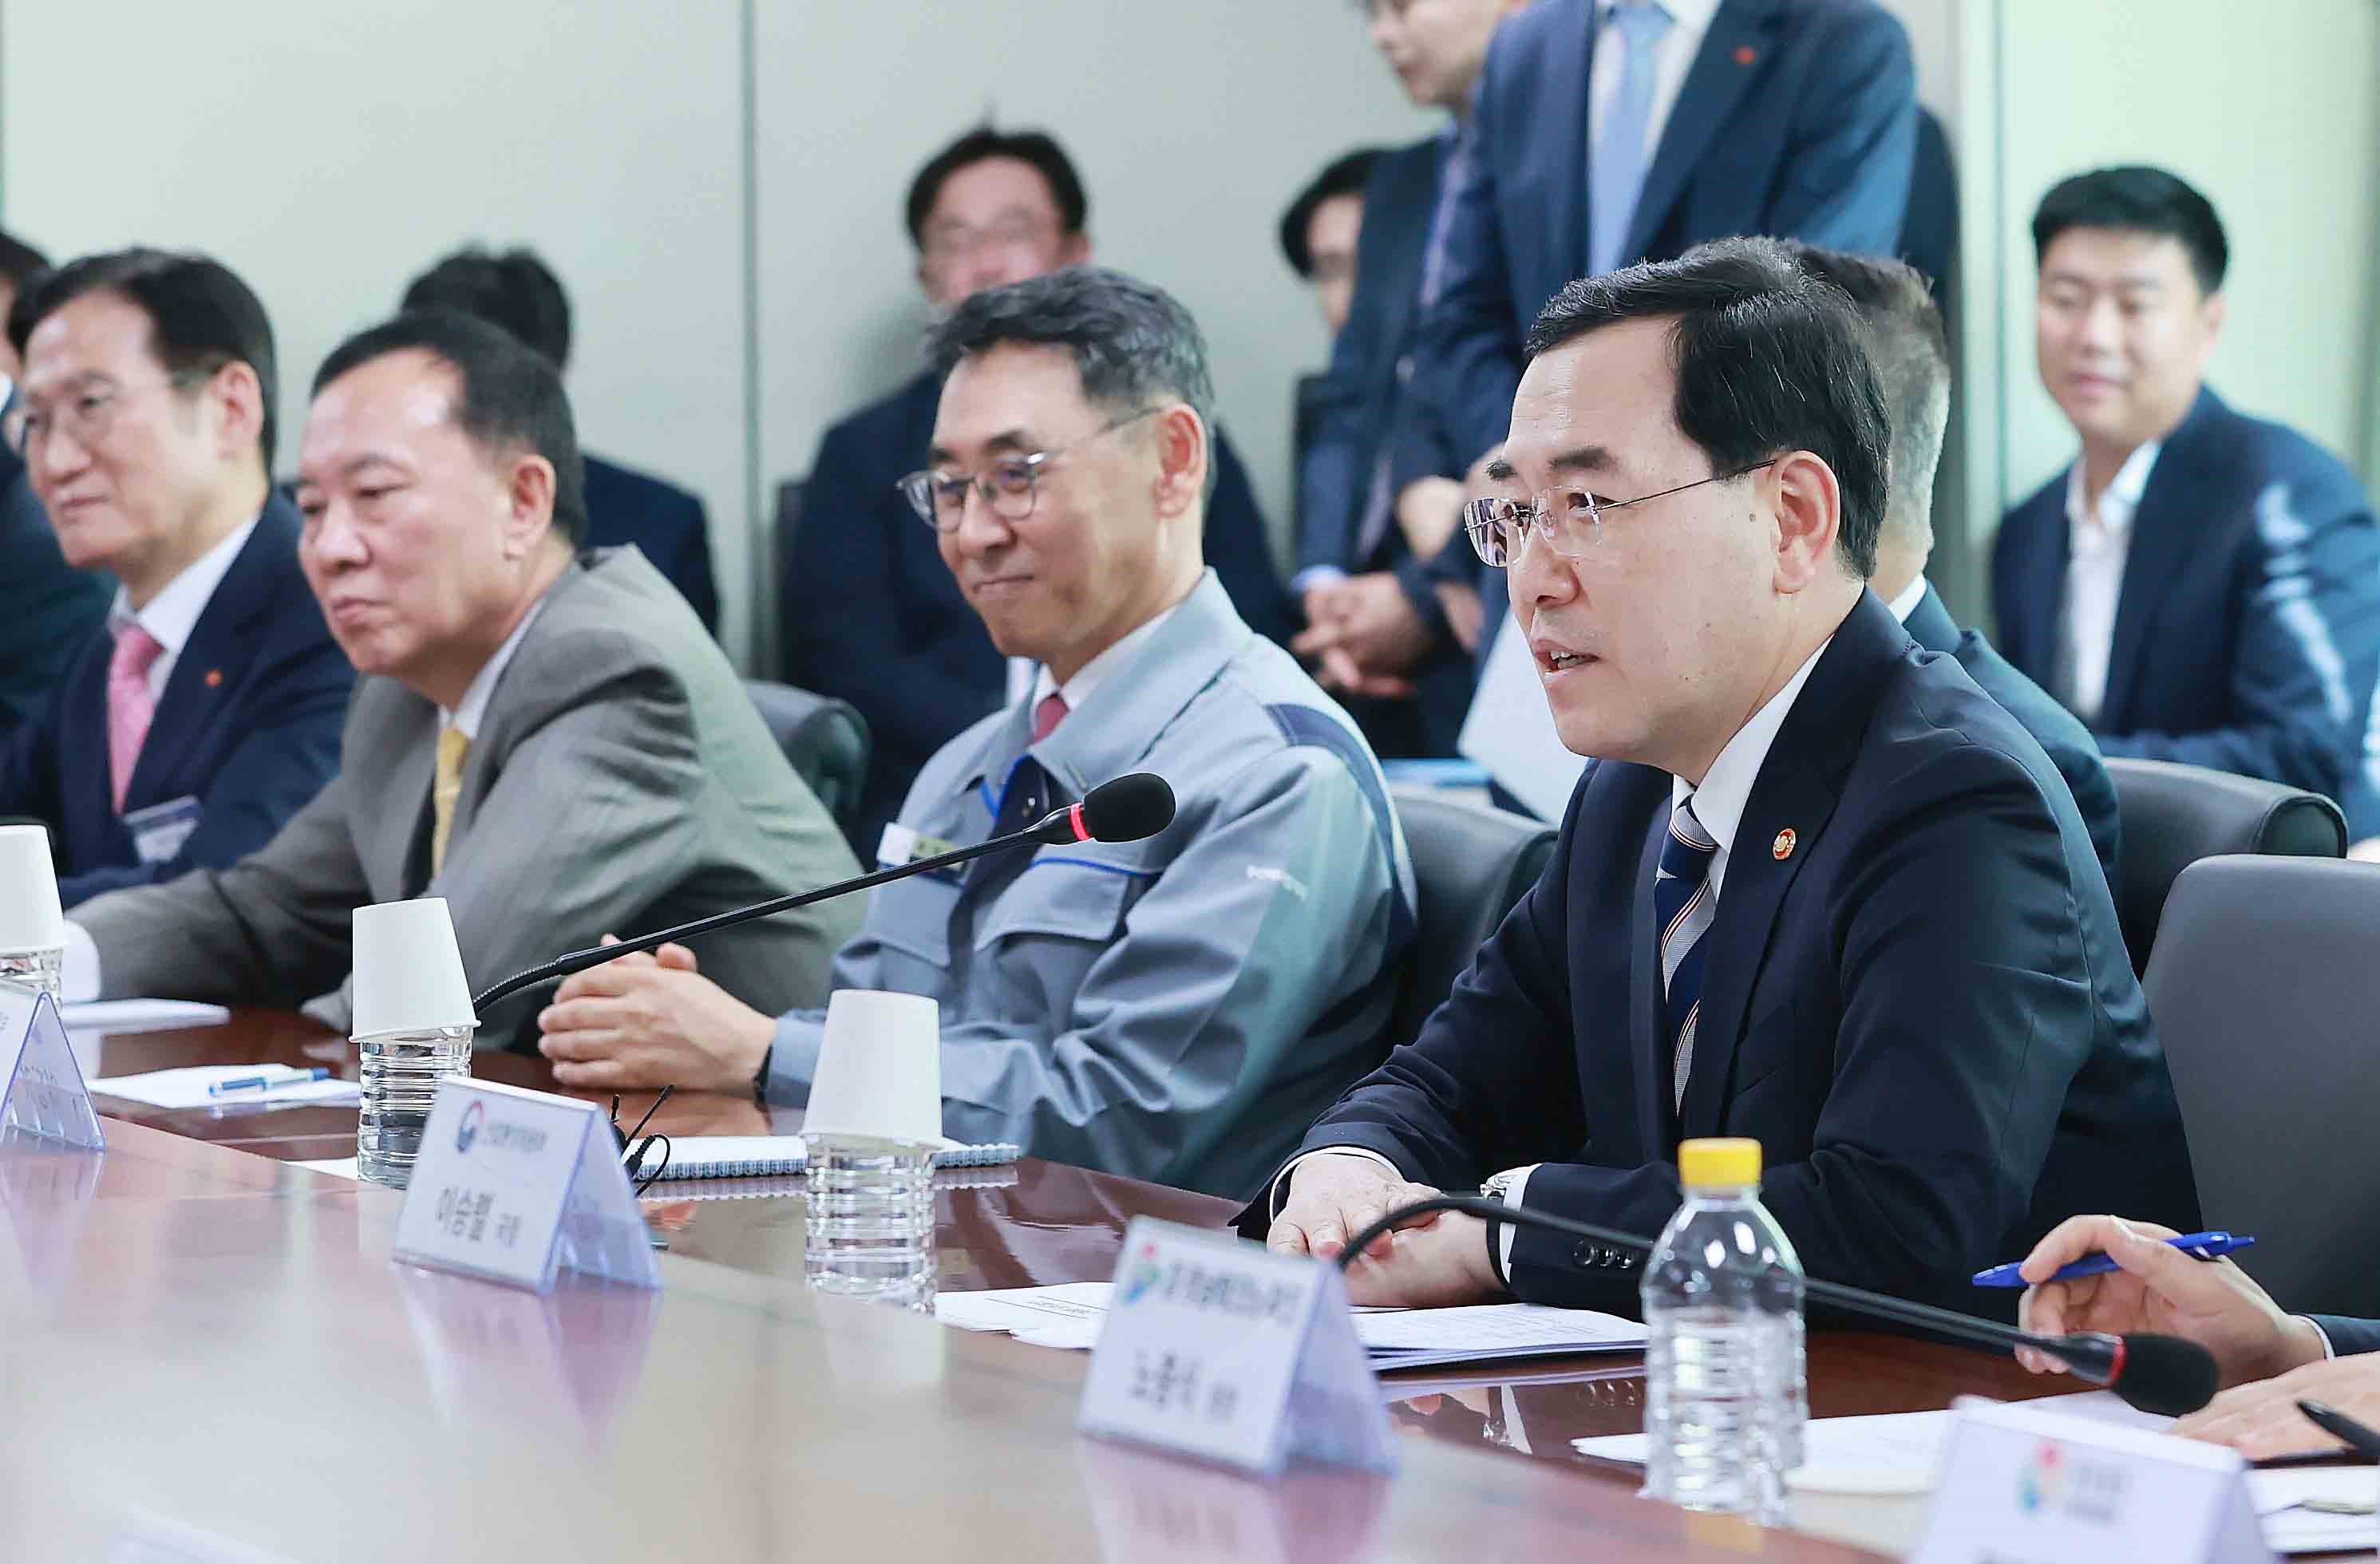 Minister Lee discusses measures to build competitive nuclear industry ecosystem